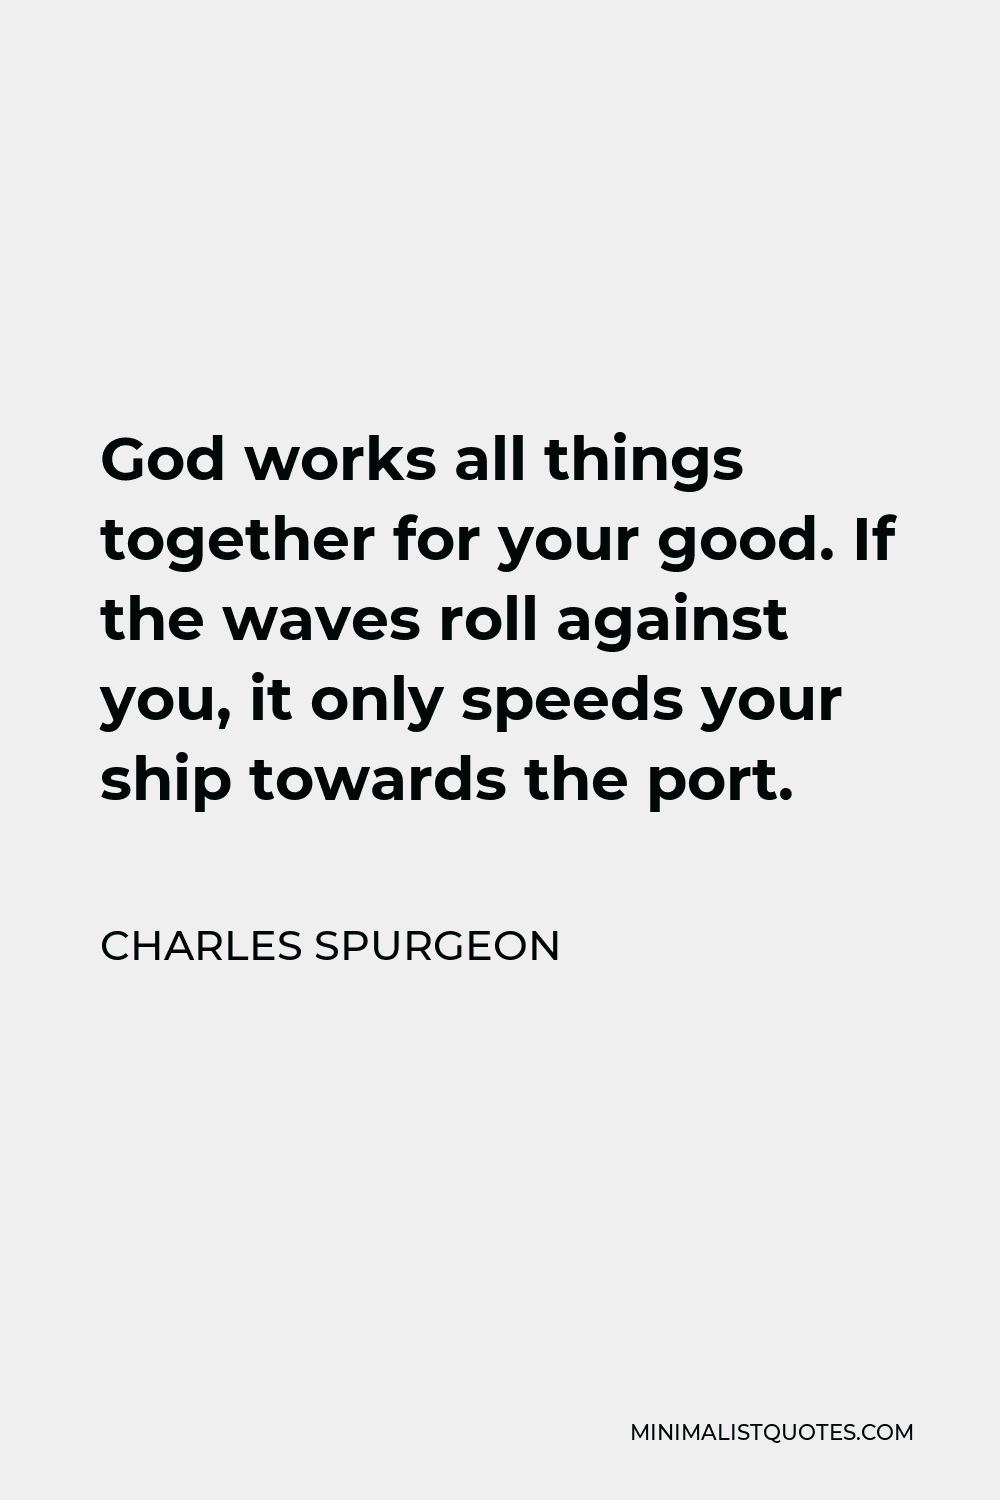 Charles Spurgeon Quote - God works all things together for your good. If the waves roll against you, it only speeds your ship towards the port.